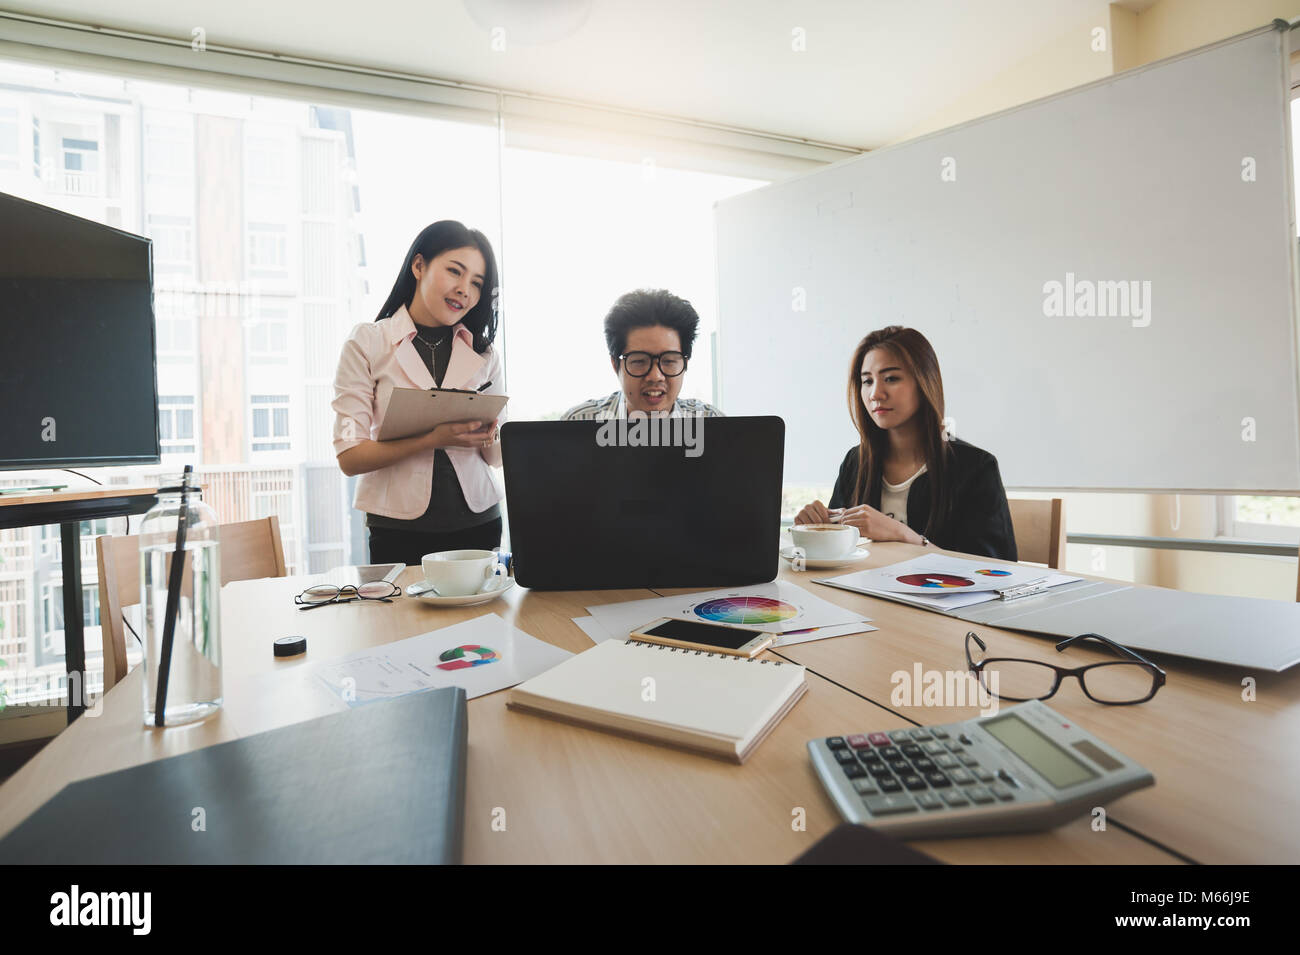 Young Asian businessman and businesswoman talking about their work in meeting room. Business team discussion planning and brainstorm in office conept. Stock Photo